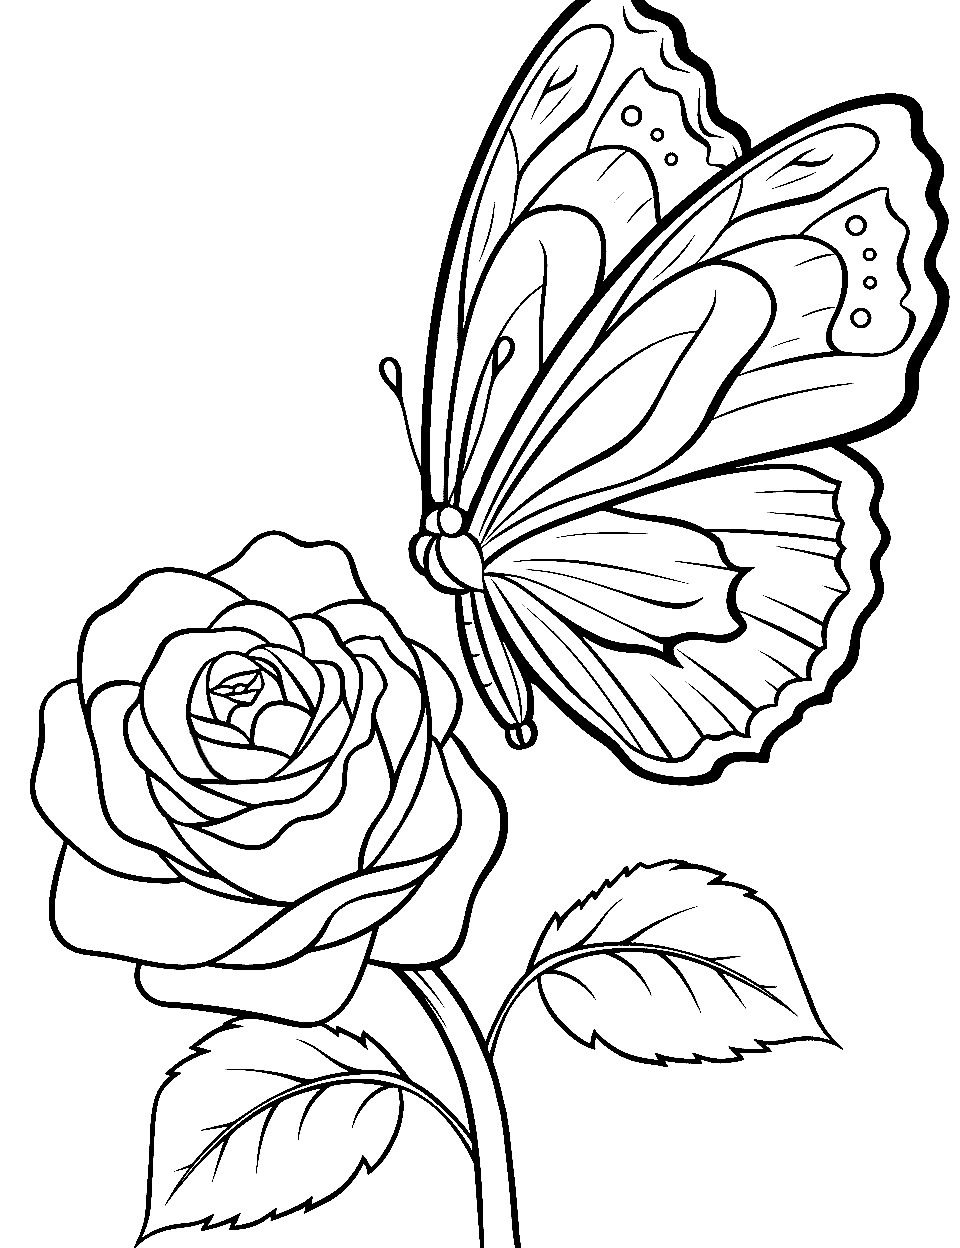 Butterfly Landing on a Petal Coloring Page - A delicate butterfly hovering over a lush rose petal.